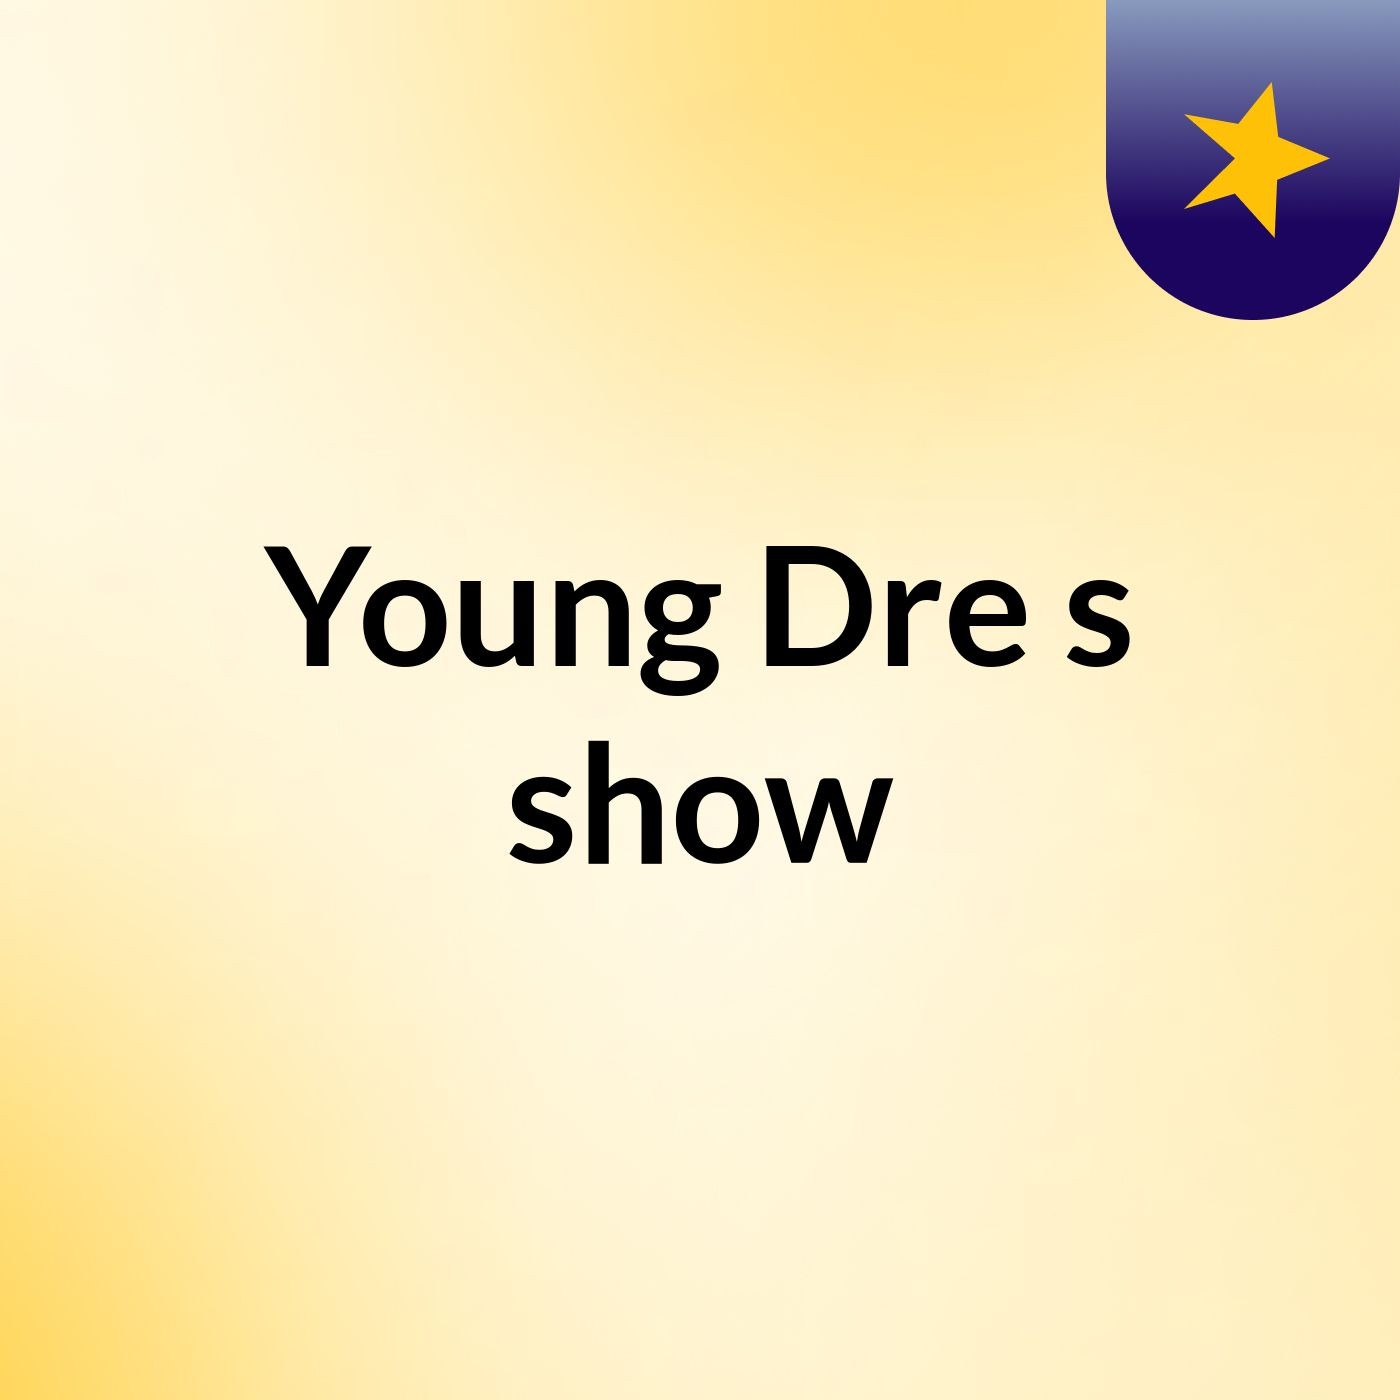 Young Dre's show